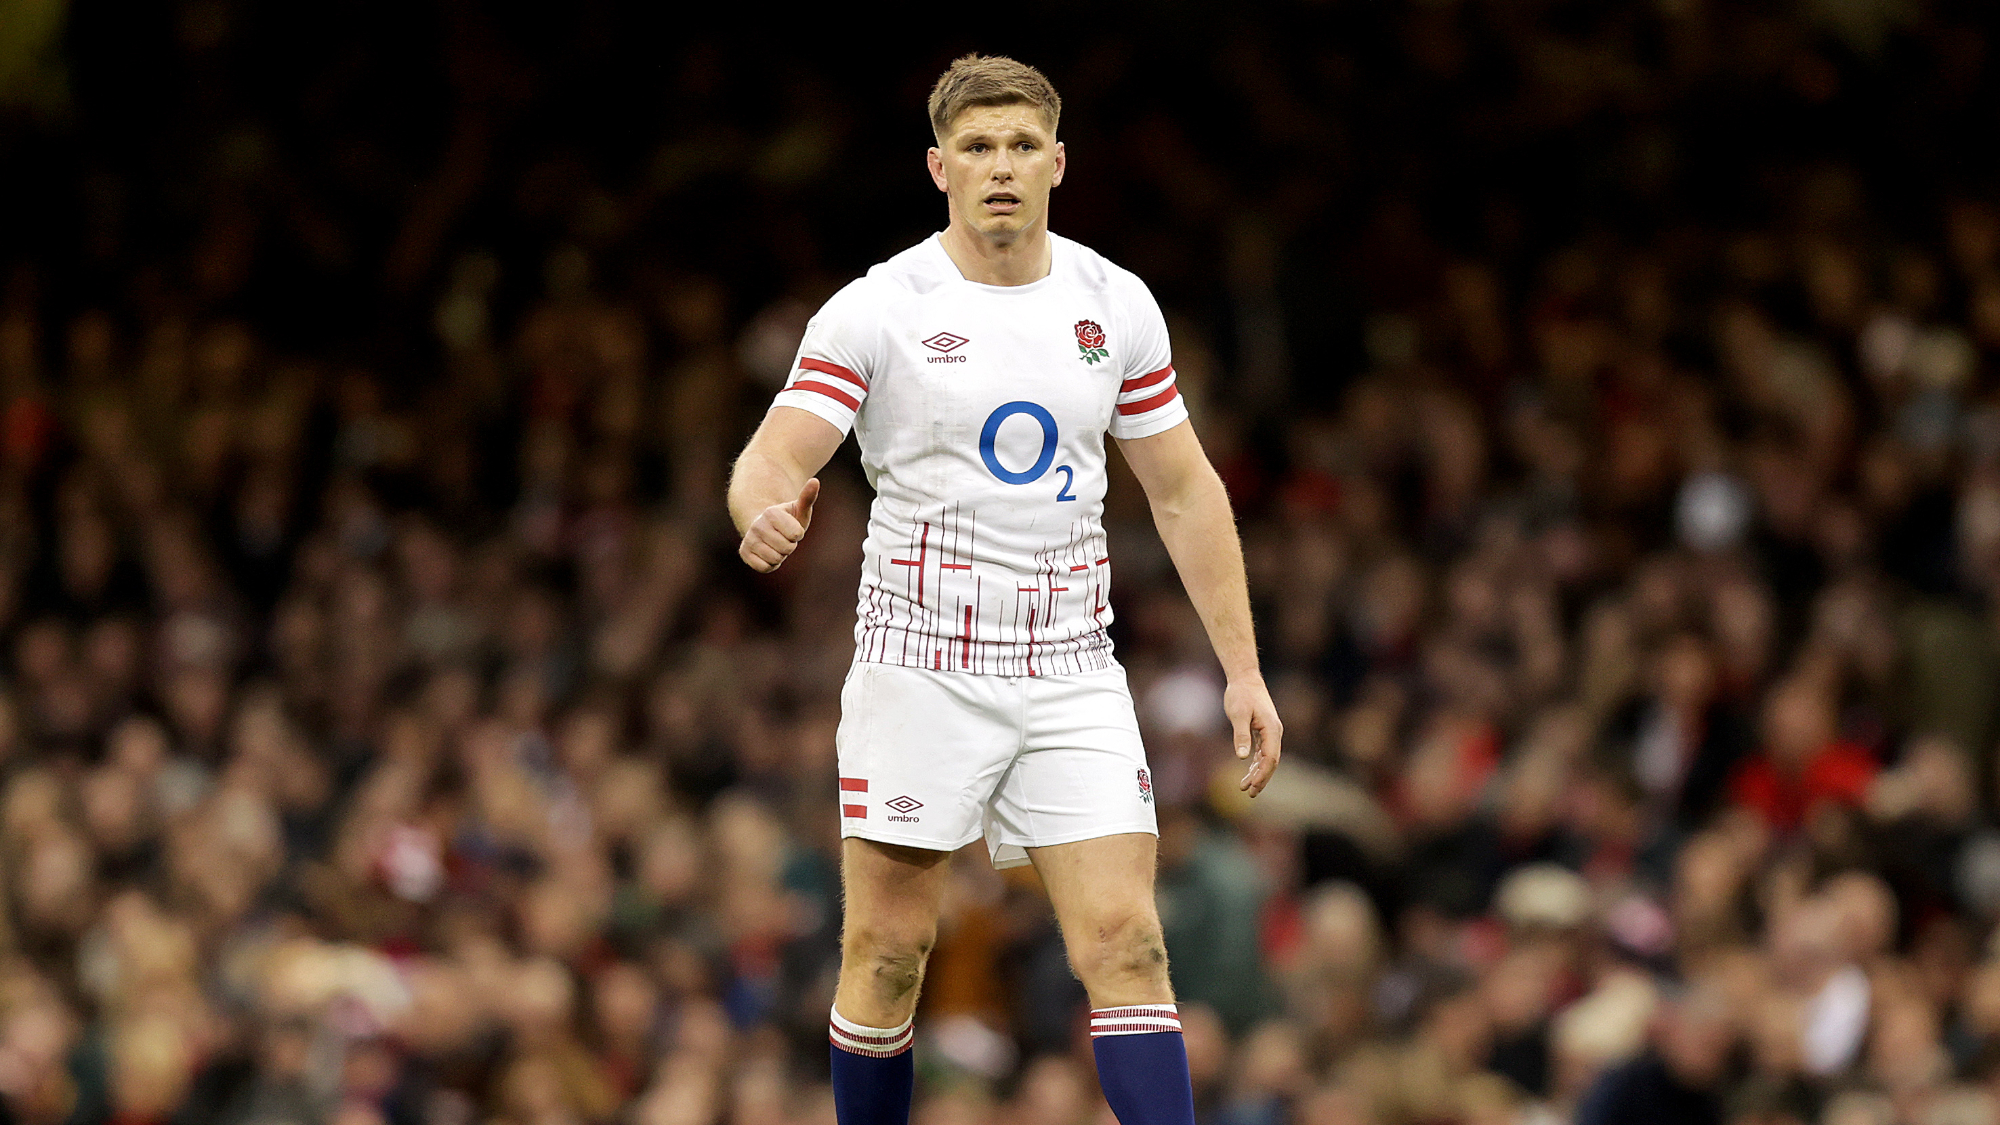 OC] Is the use of BMI in sports outdated? - 2023 six nations rugby